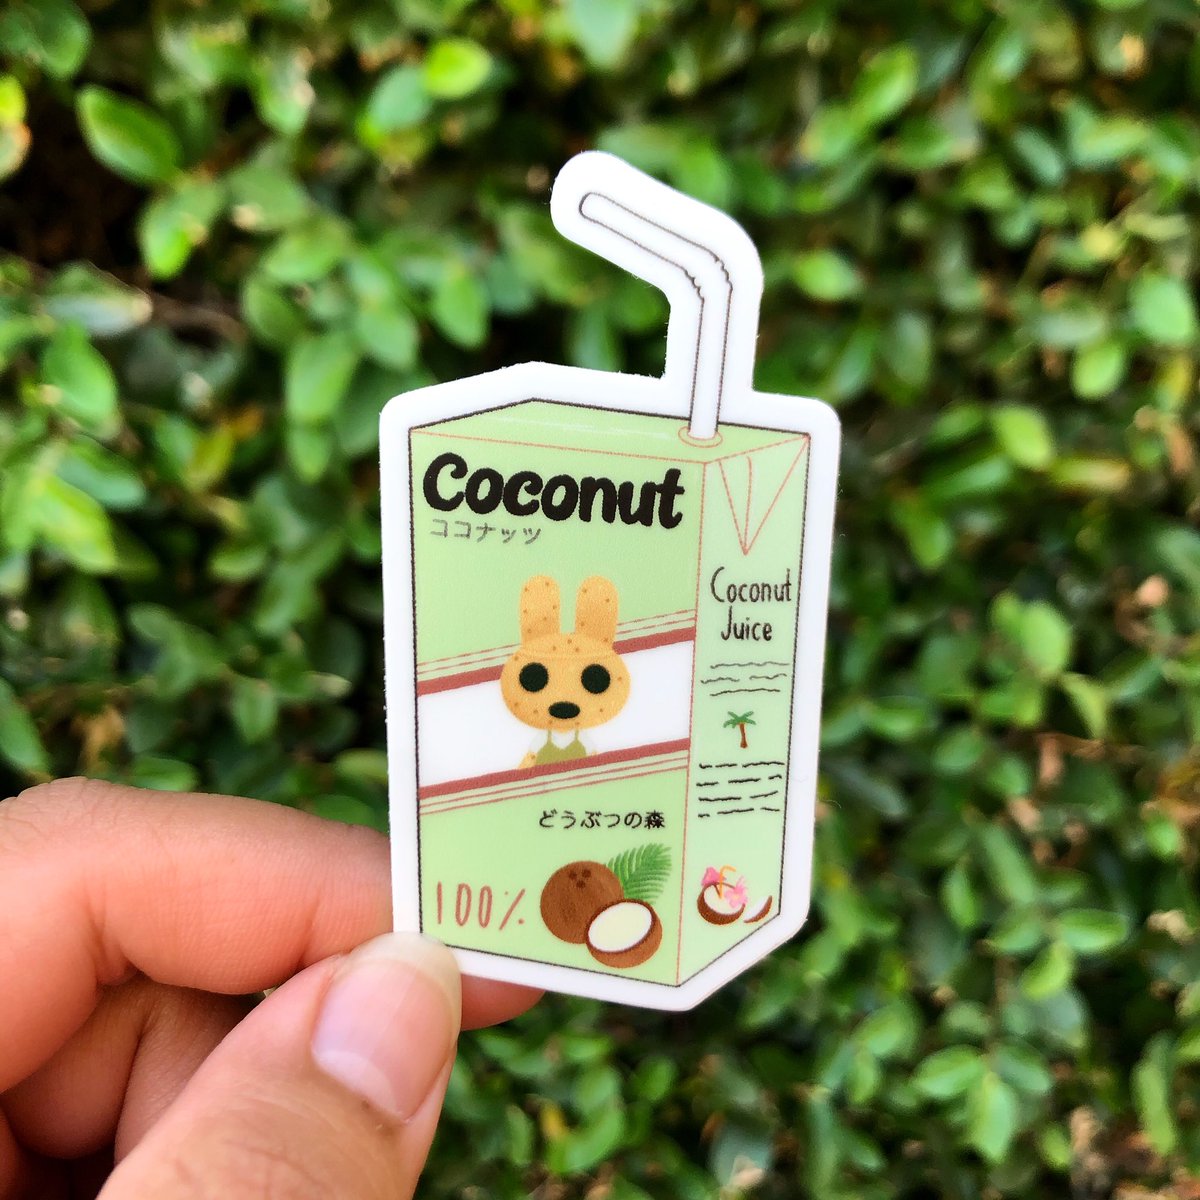 Our Coco juice box stickers are live! Come check them out! 
🥥🥥🥥🥥🥥🥥🥥🥥
#animalcrossing #acnh #newhorizon #stickers #どうぶつの森 #supportlocalbusiness #kawaiiart #cutearteveryday #cutestickers #journalstickers #diecutstickers #diecut #stickershop #stickerartist